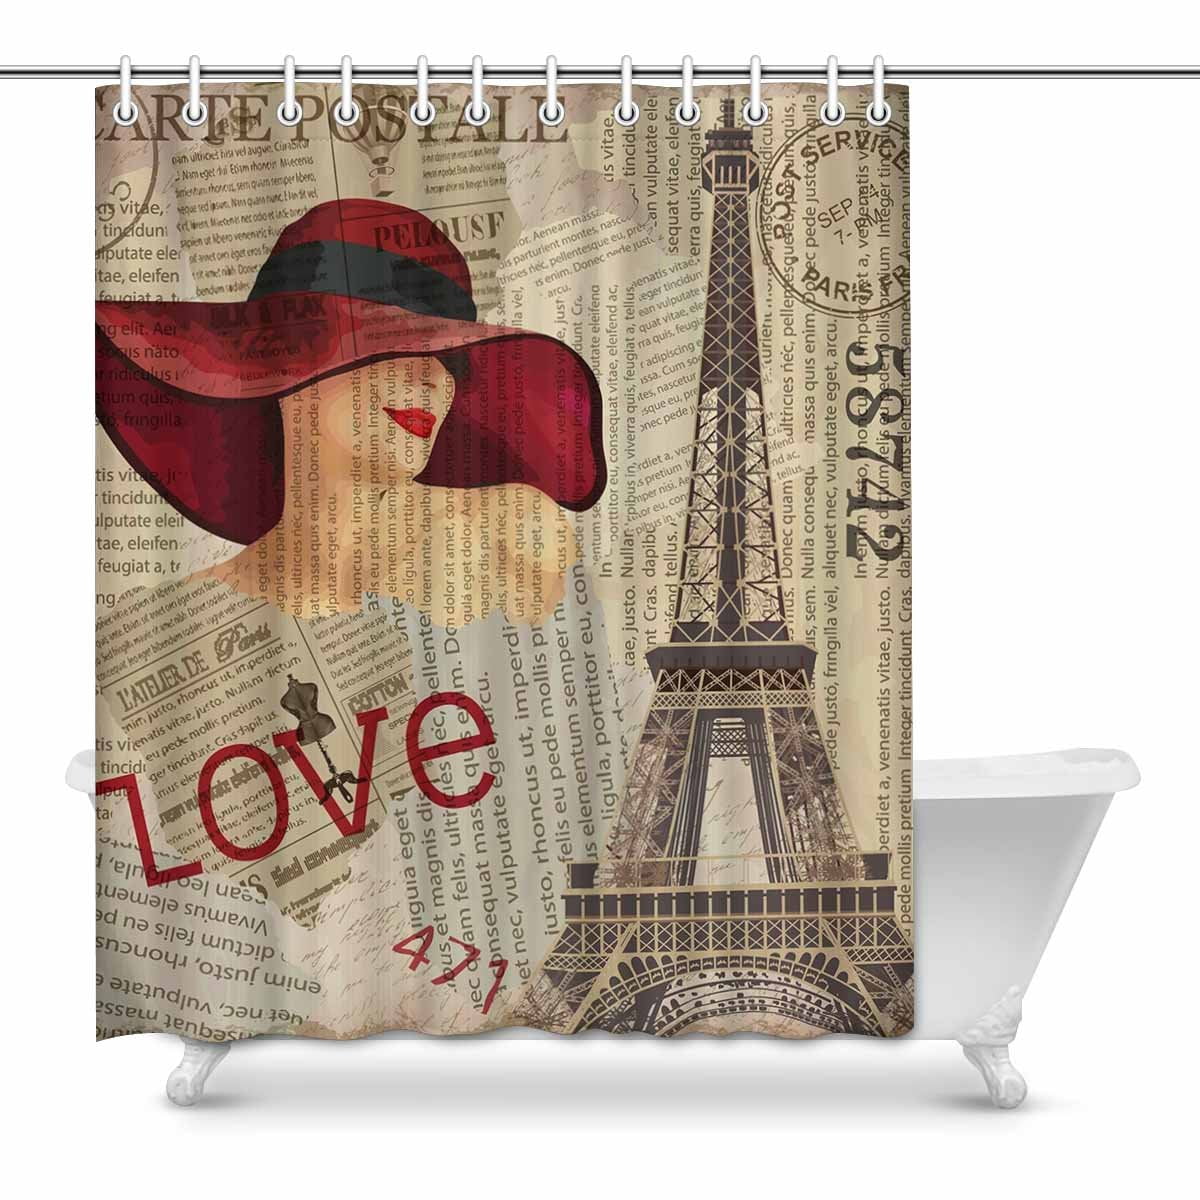 Vintage Sexy Pinup Girl Shower Curtain Sets Waterproof Bathtub Curtain Hooks 70 Authentic